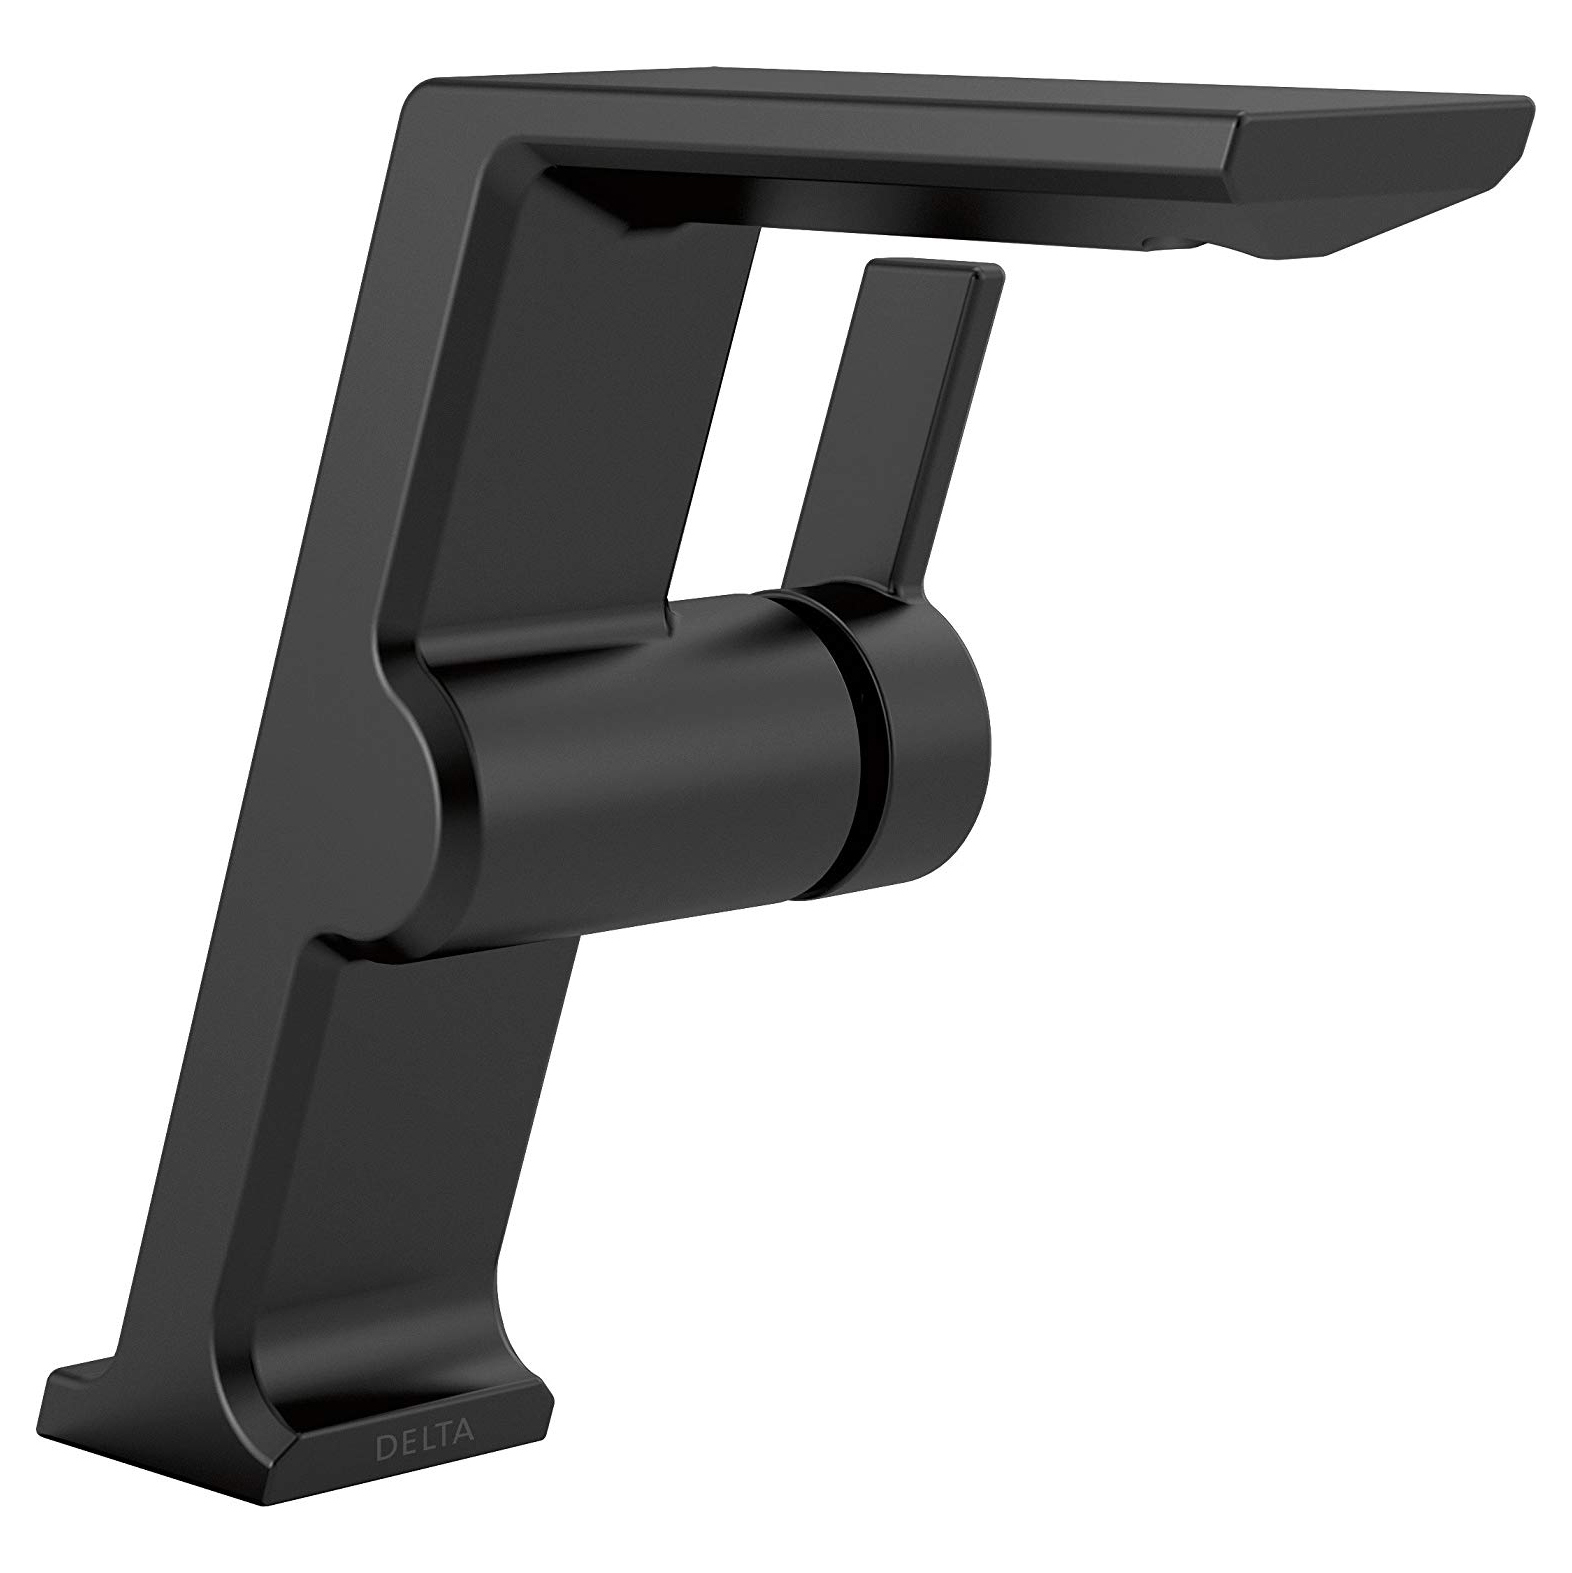 Pivotal Single Hole Mid-Height Vessel Faucet in Matte Black